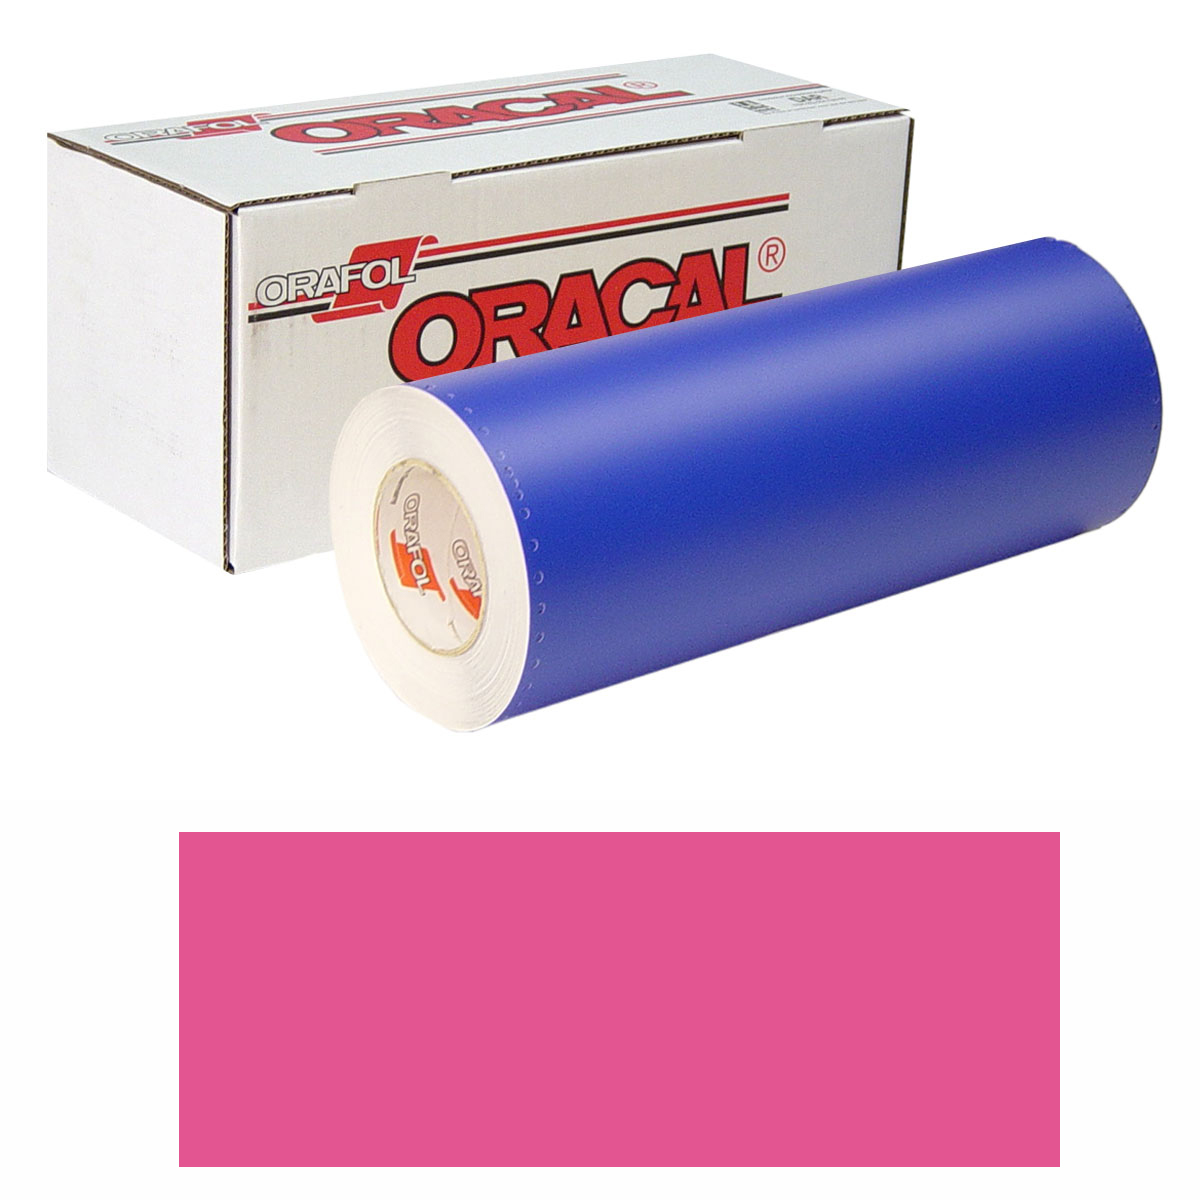 ORACAL 8300 30in X 50yd 041 Pink